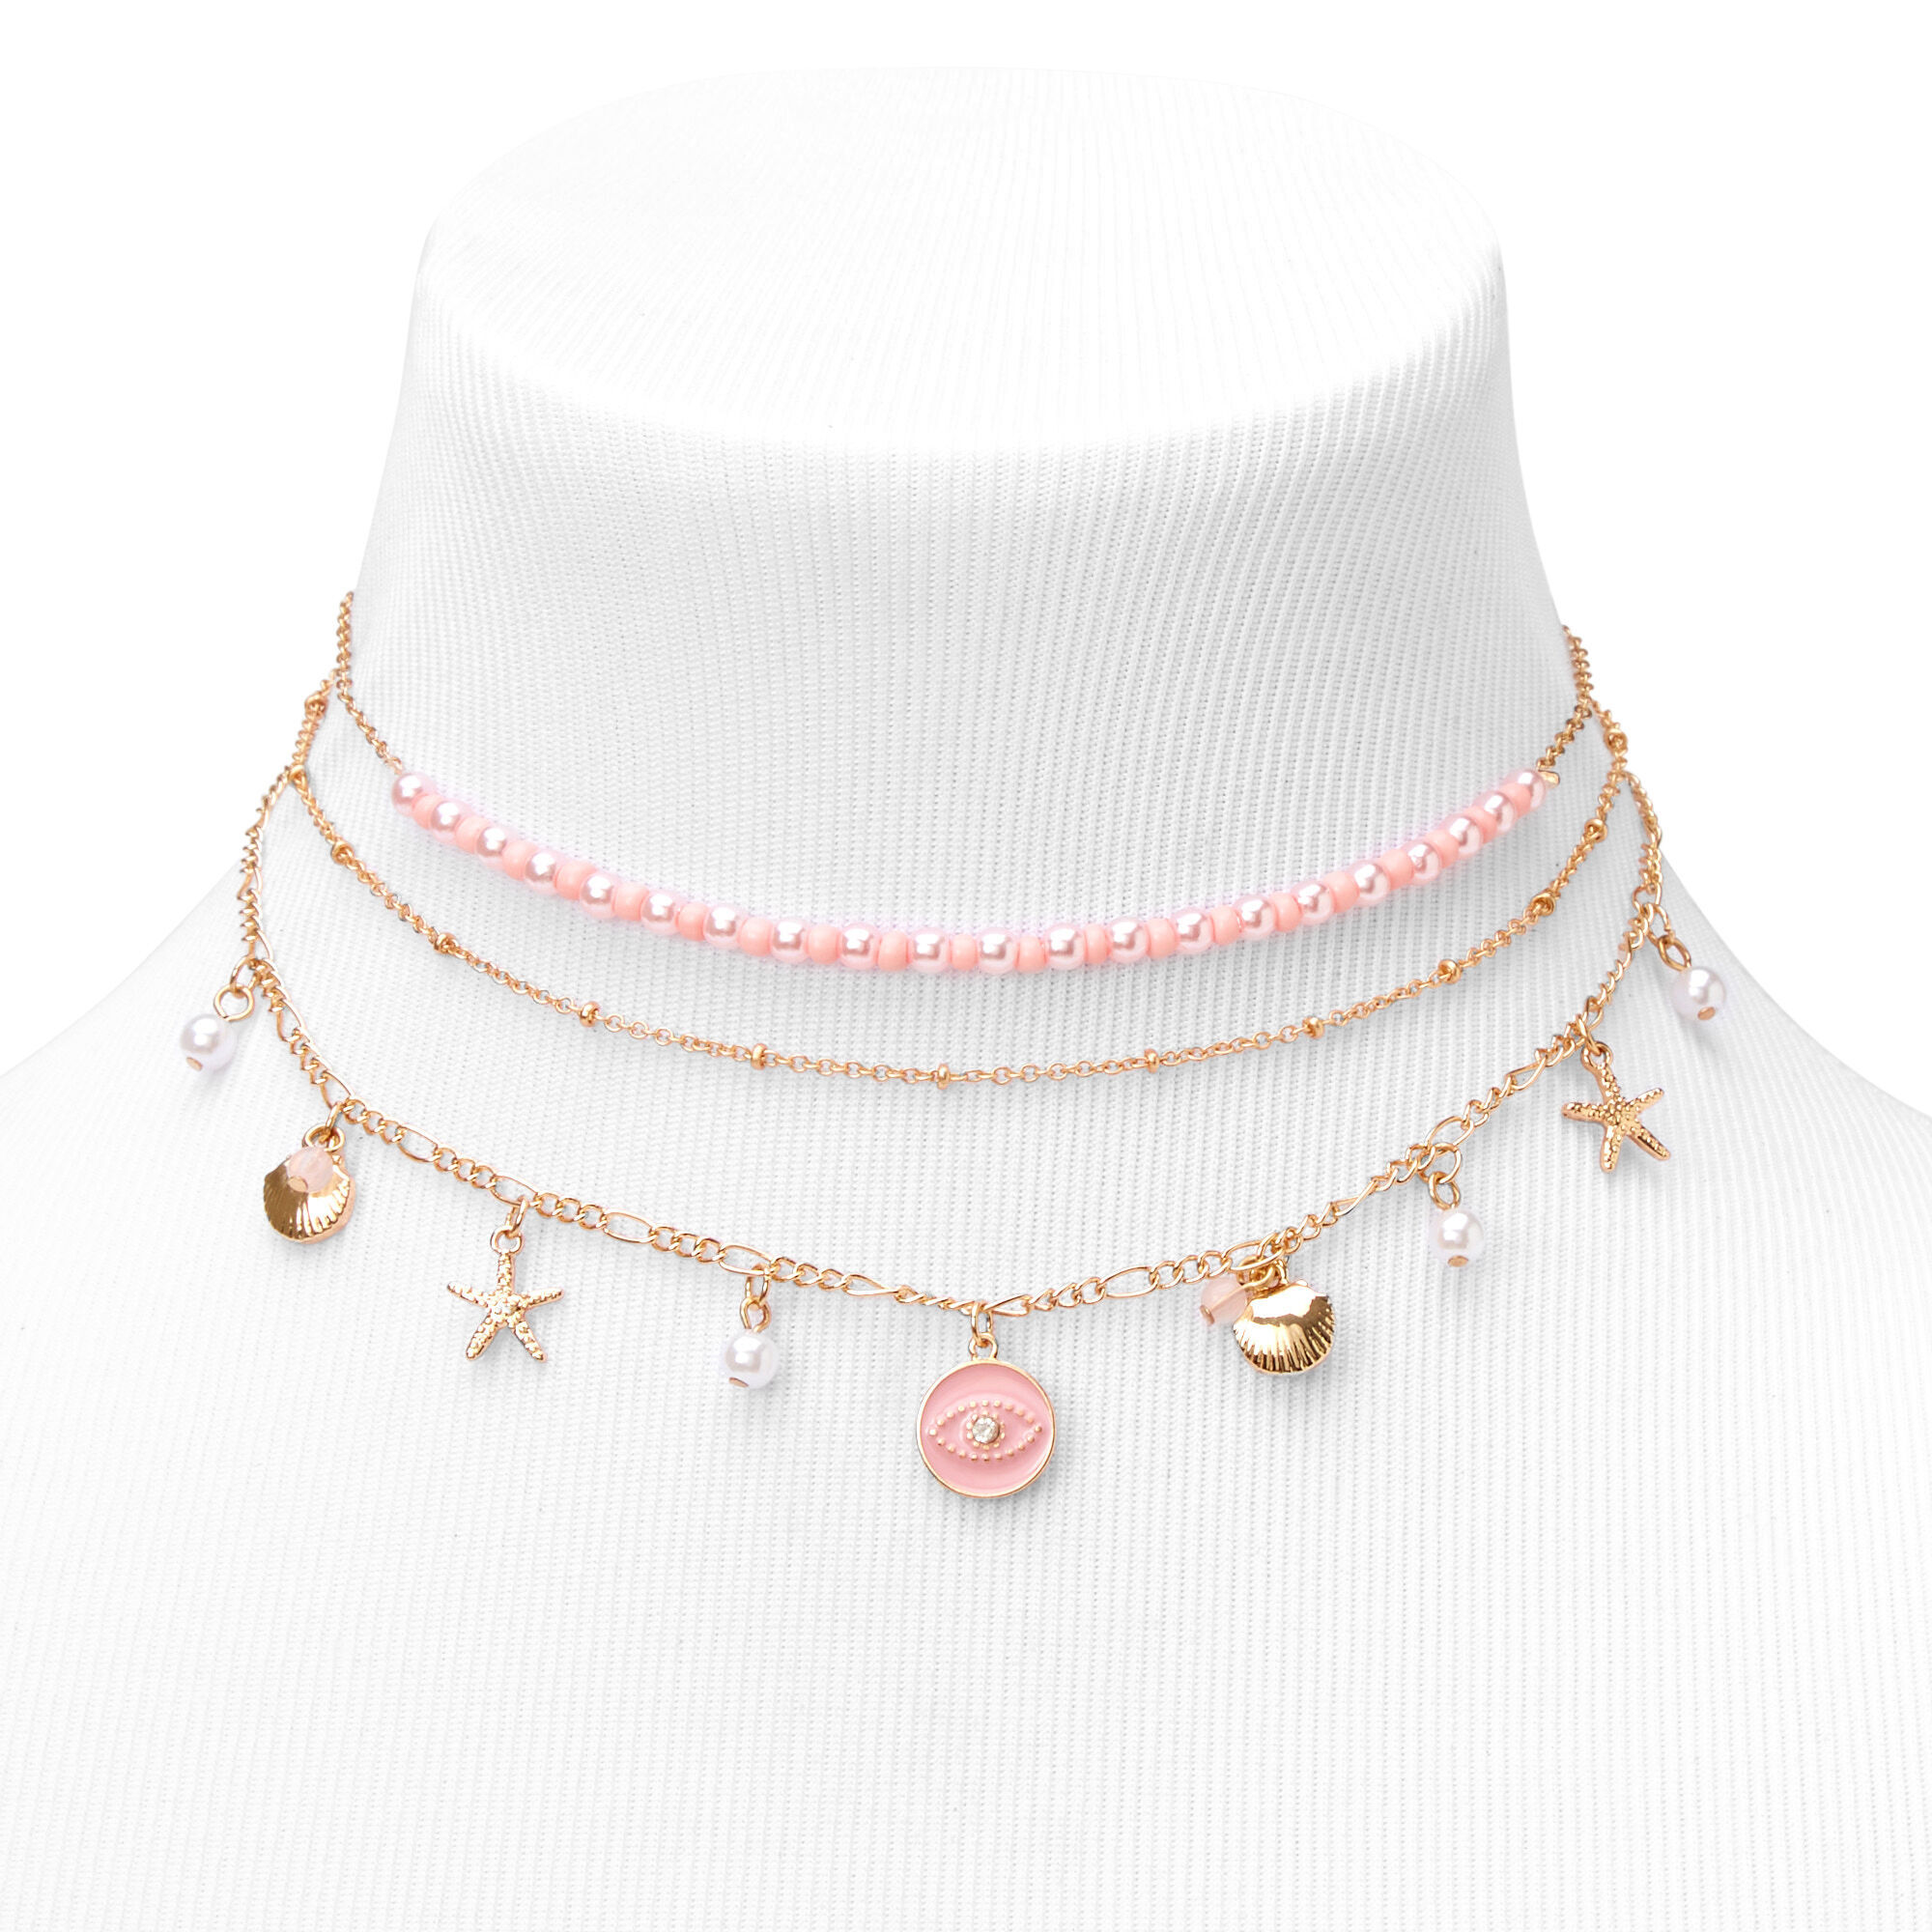 & Beads & Shell Necklaces - 3 Pack | Icing US